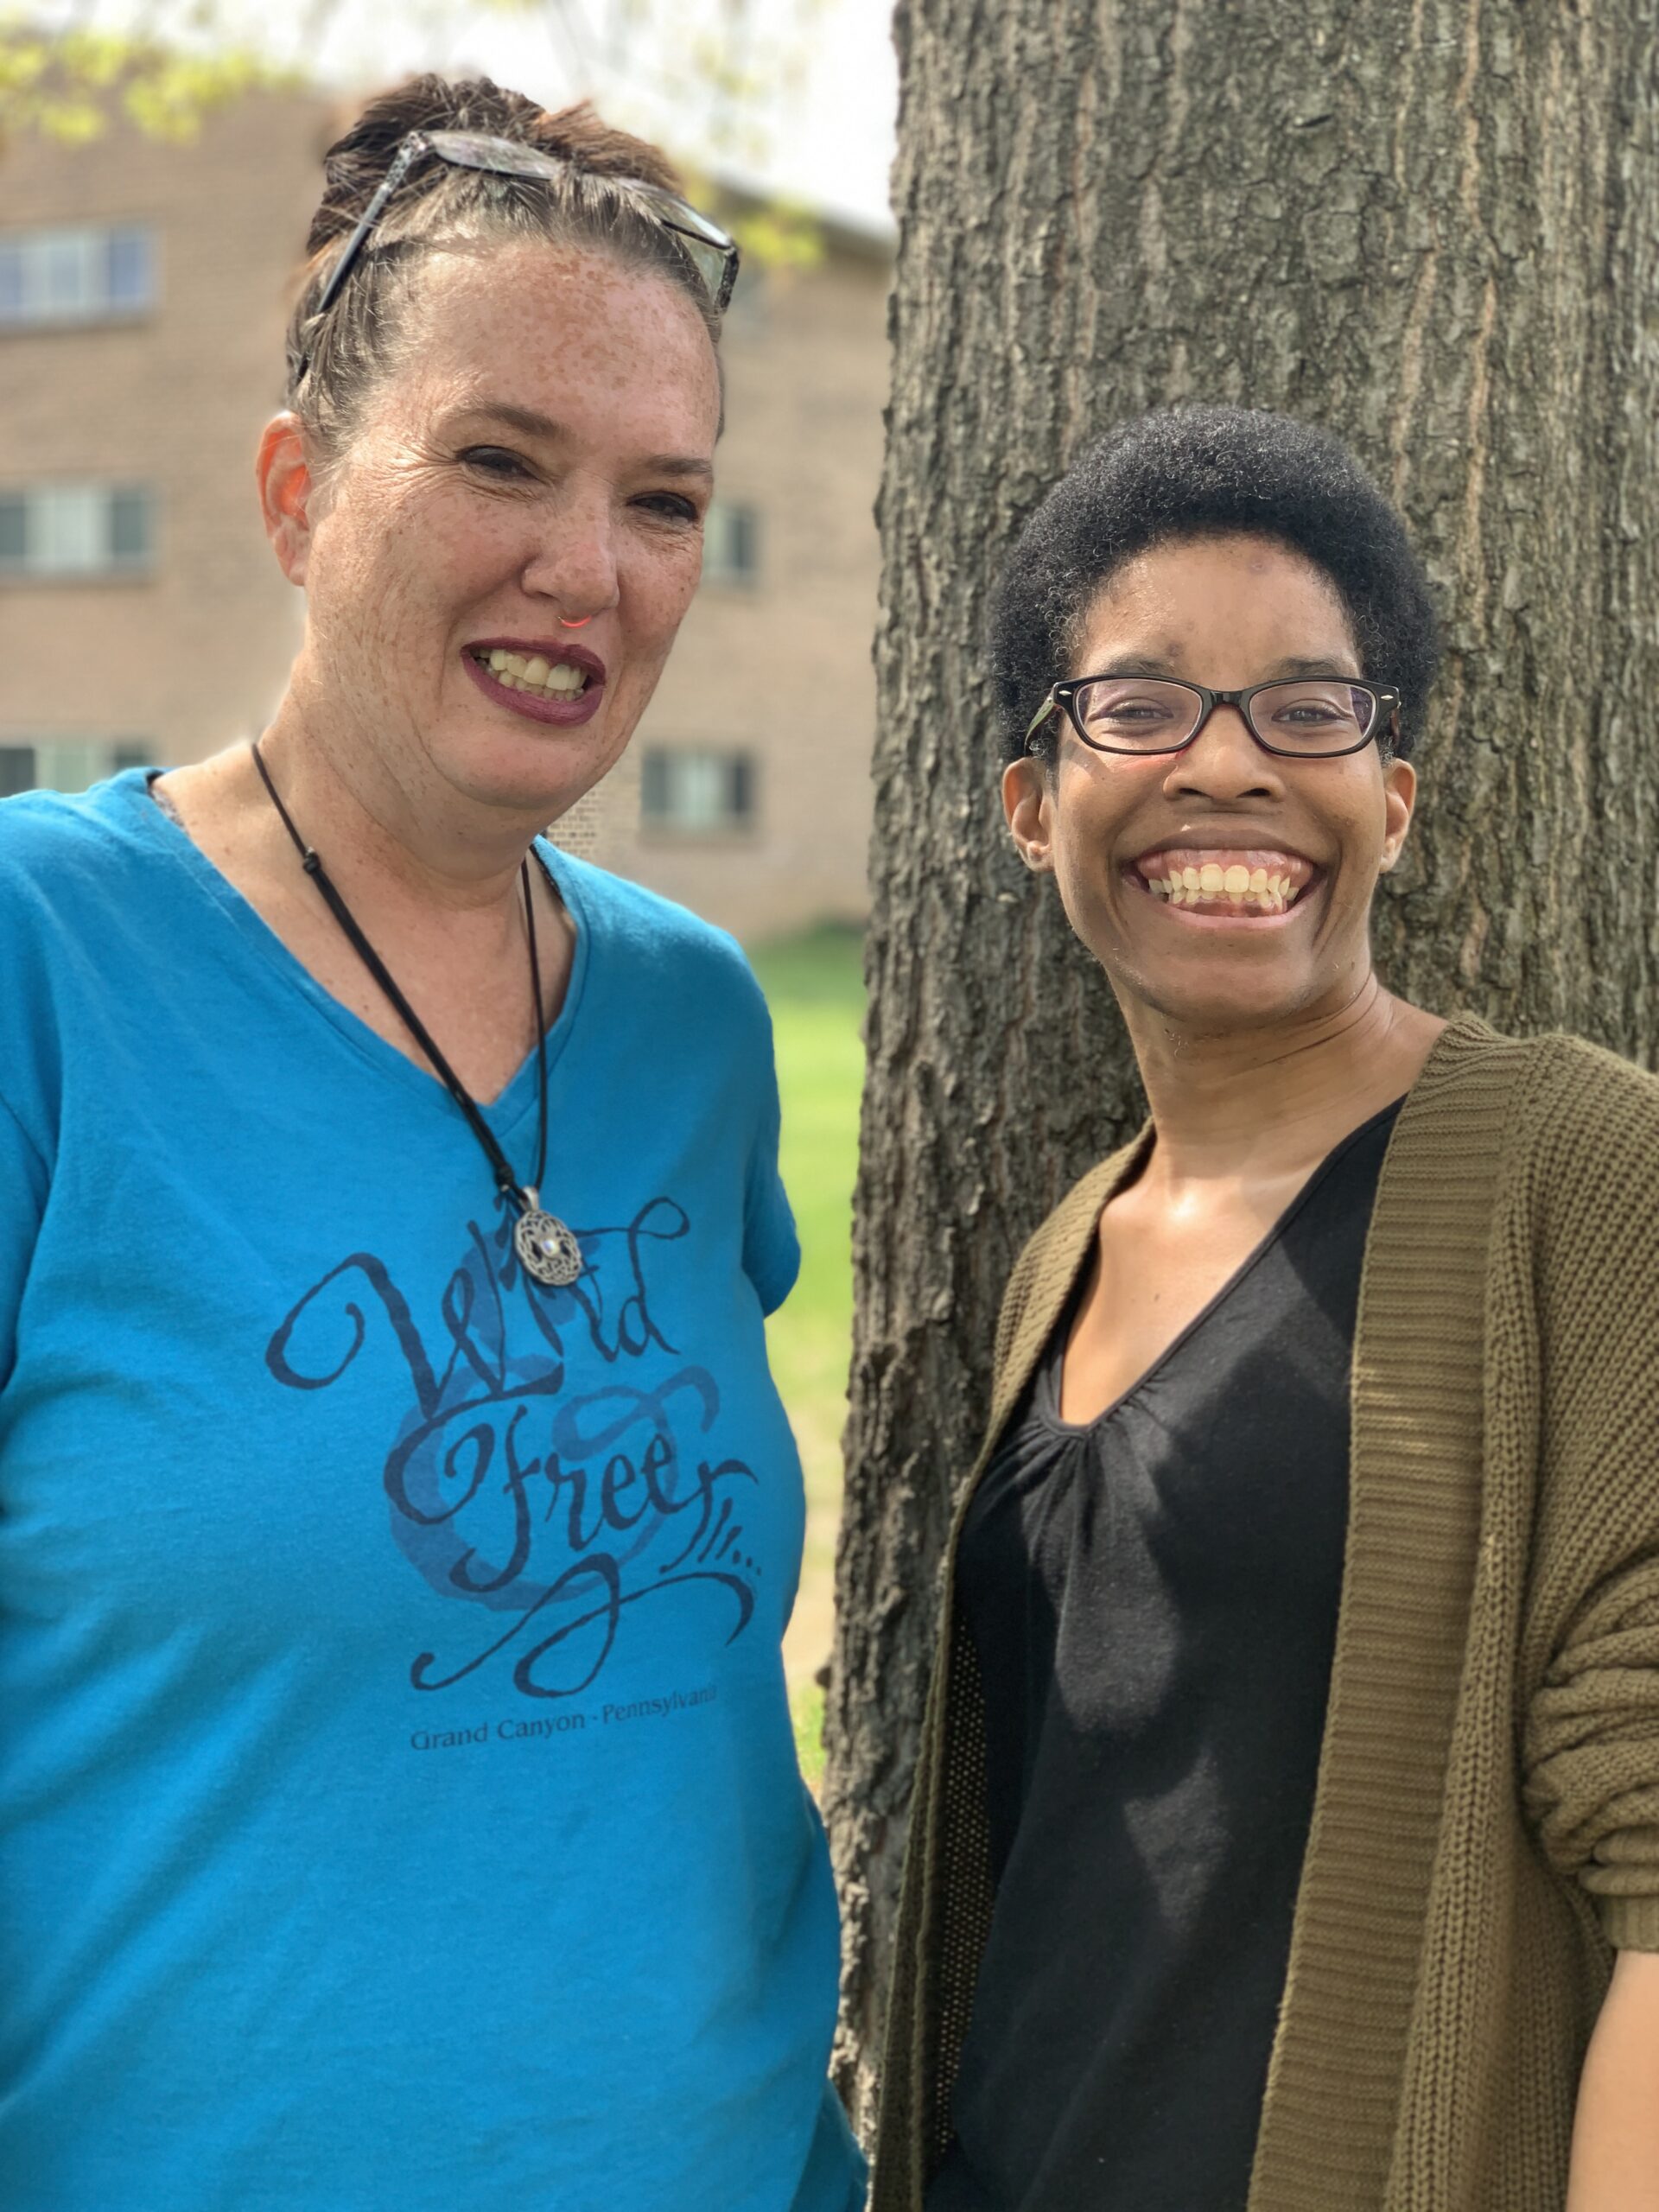 Finding a Voice Through Peer Support Ashley and Roz